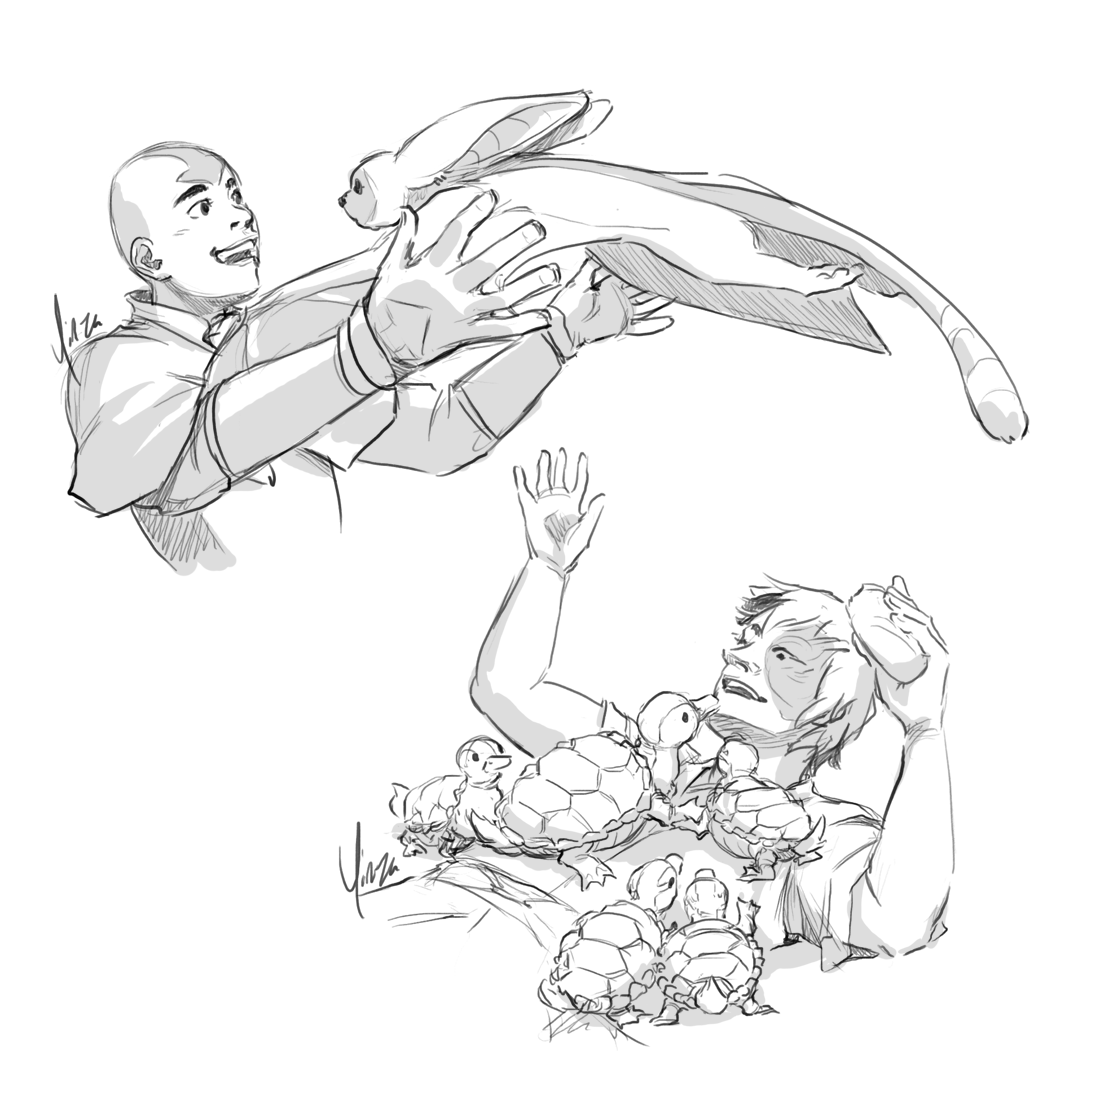 Two sketches: one of Aang catching Momo as he flies towards him, and another of Zuko lying on the ground being swarmed by turtle ducks.